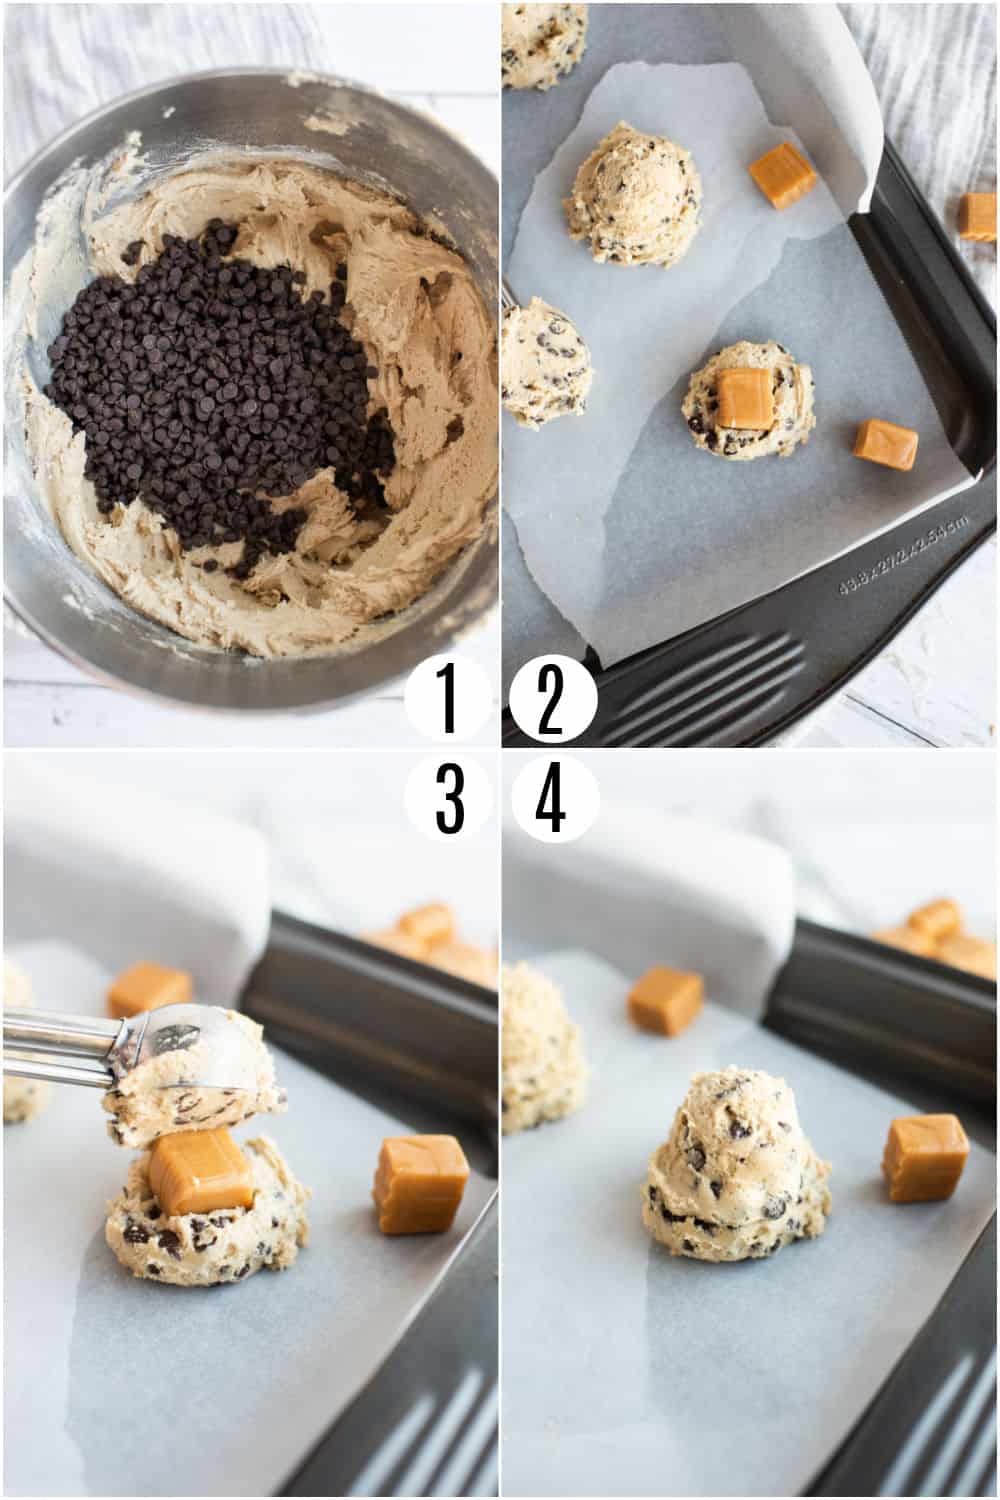 Step by step photos showing how to stuff chocolate chip cookies with caramels.